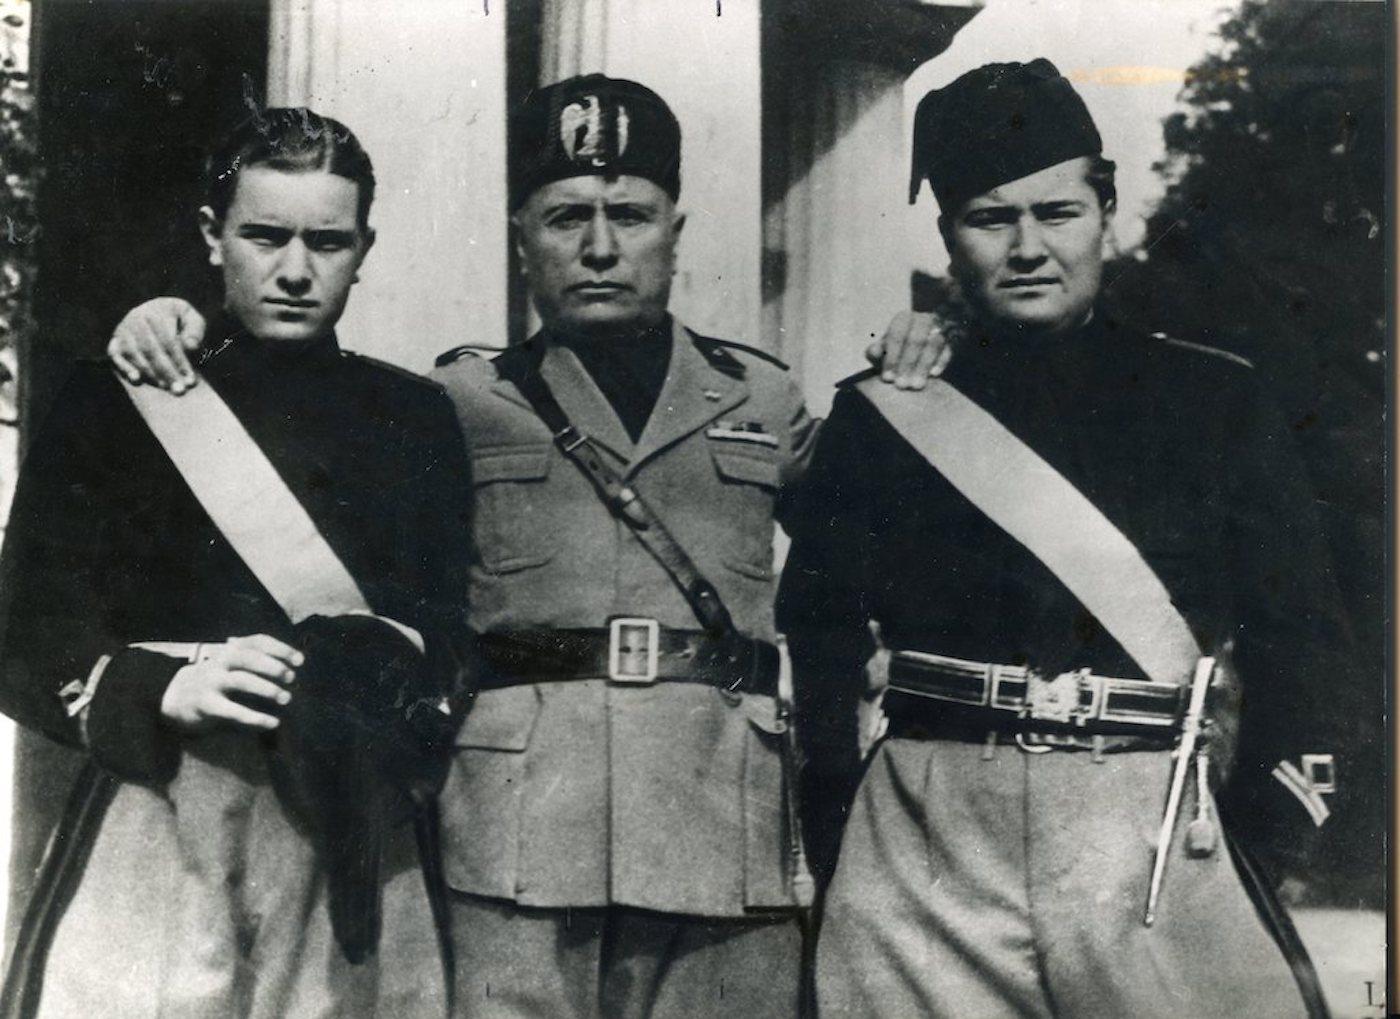 Black and White Photograph Unknown - Mussolini With Two Young Men - Rome - Photo Vintage - 1935